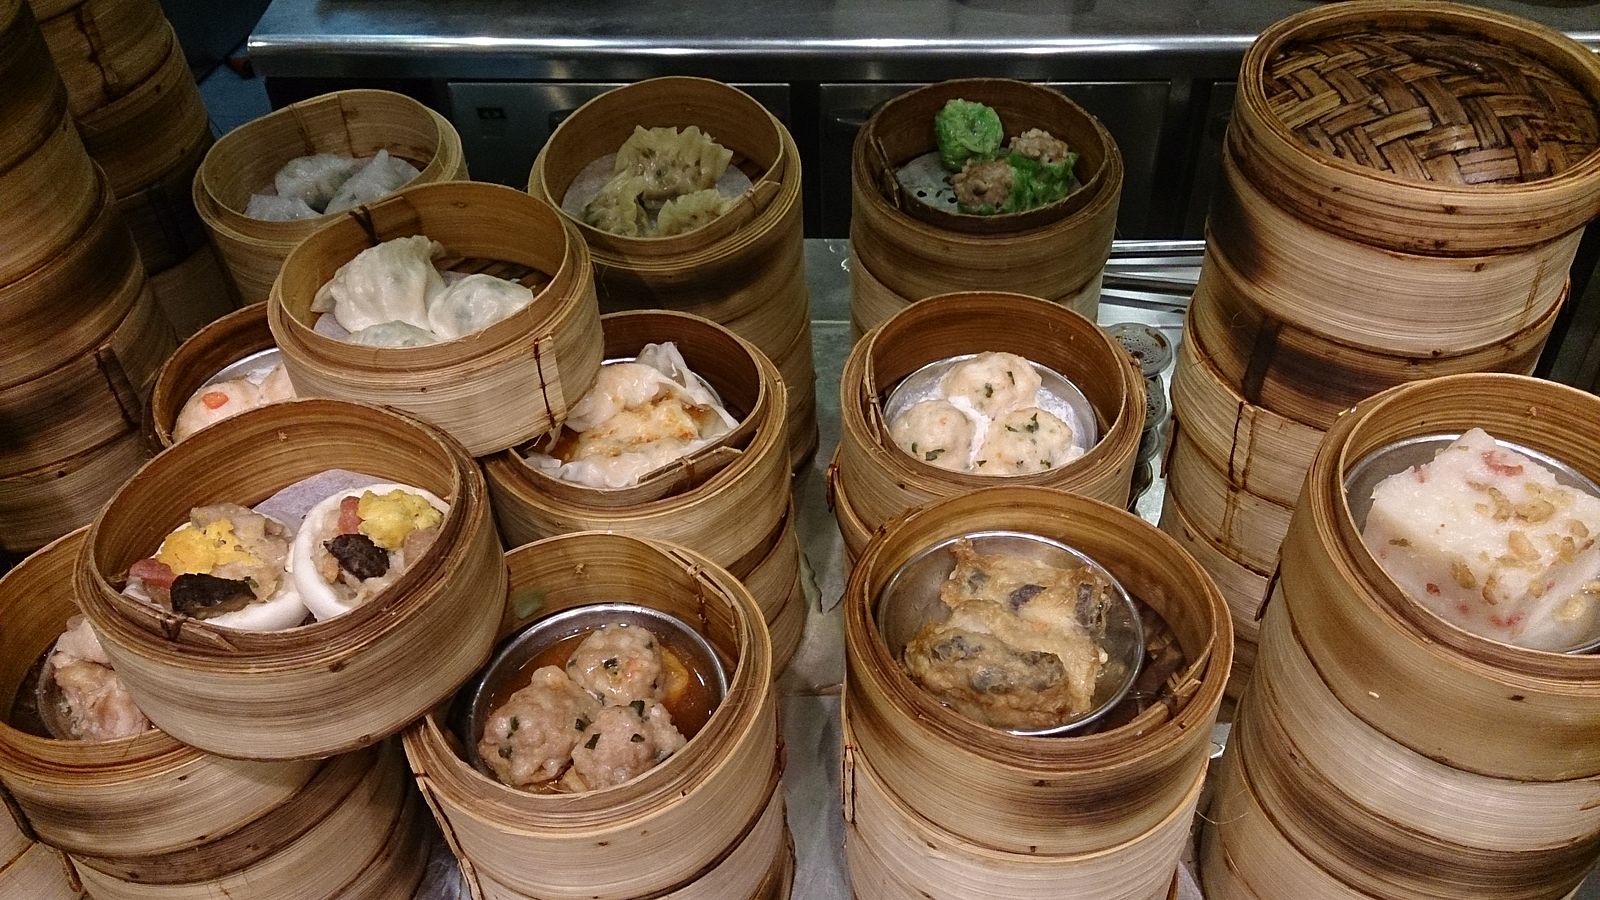 Difference Between Dim sum and Dumplings